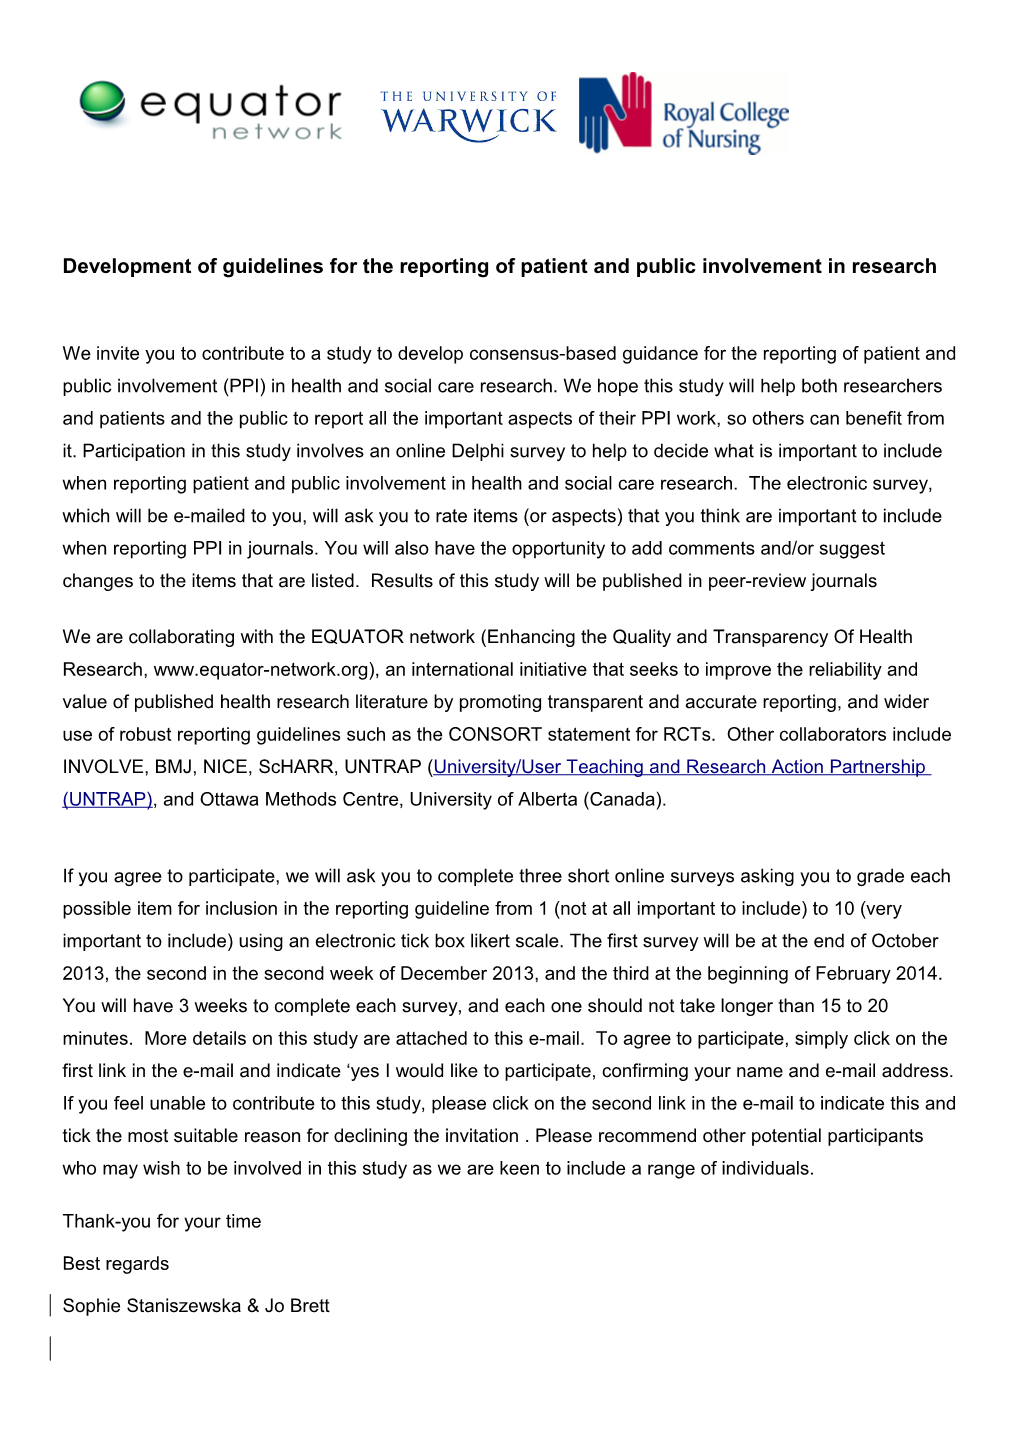 Development of Guidelines for the Reporting of Patient and Public Involvement in Research